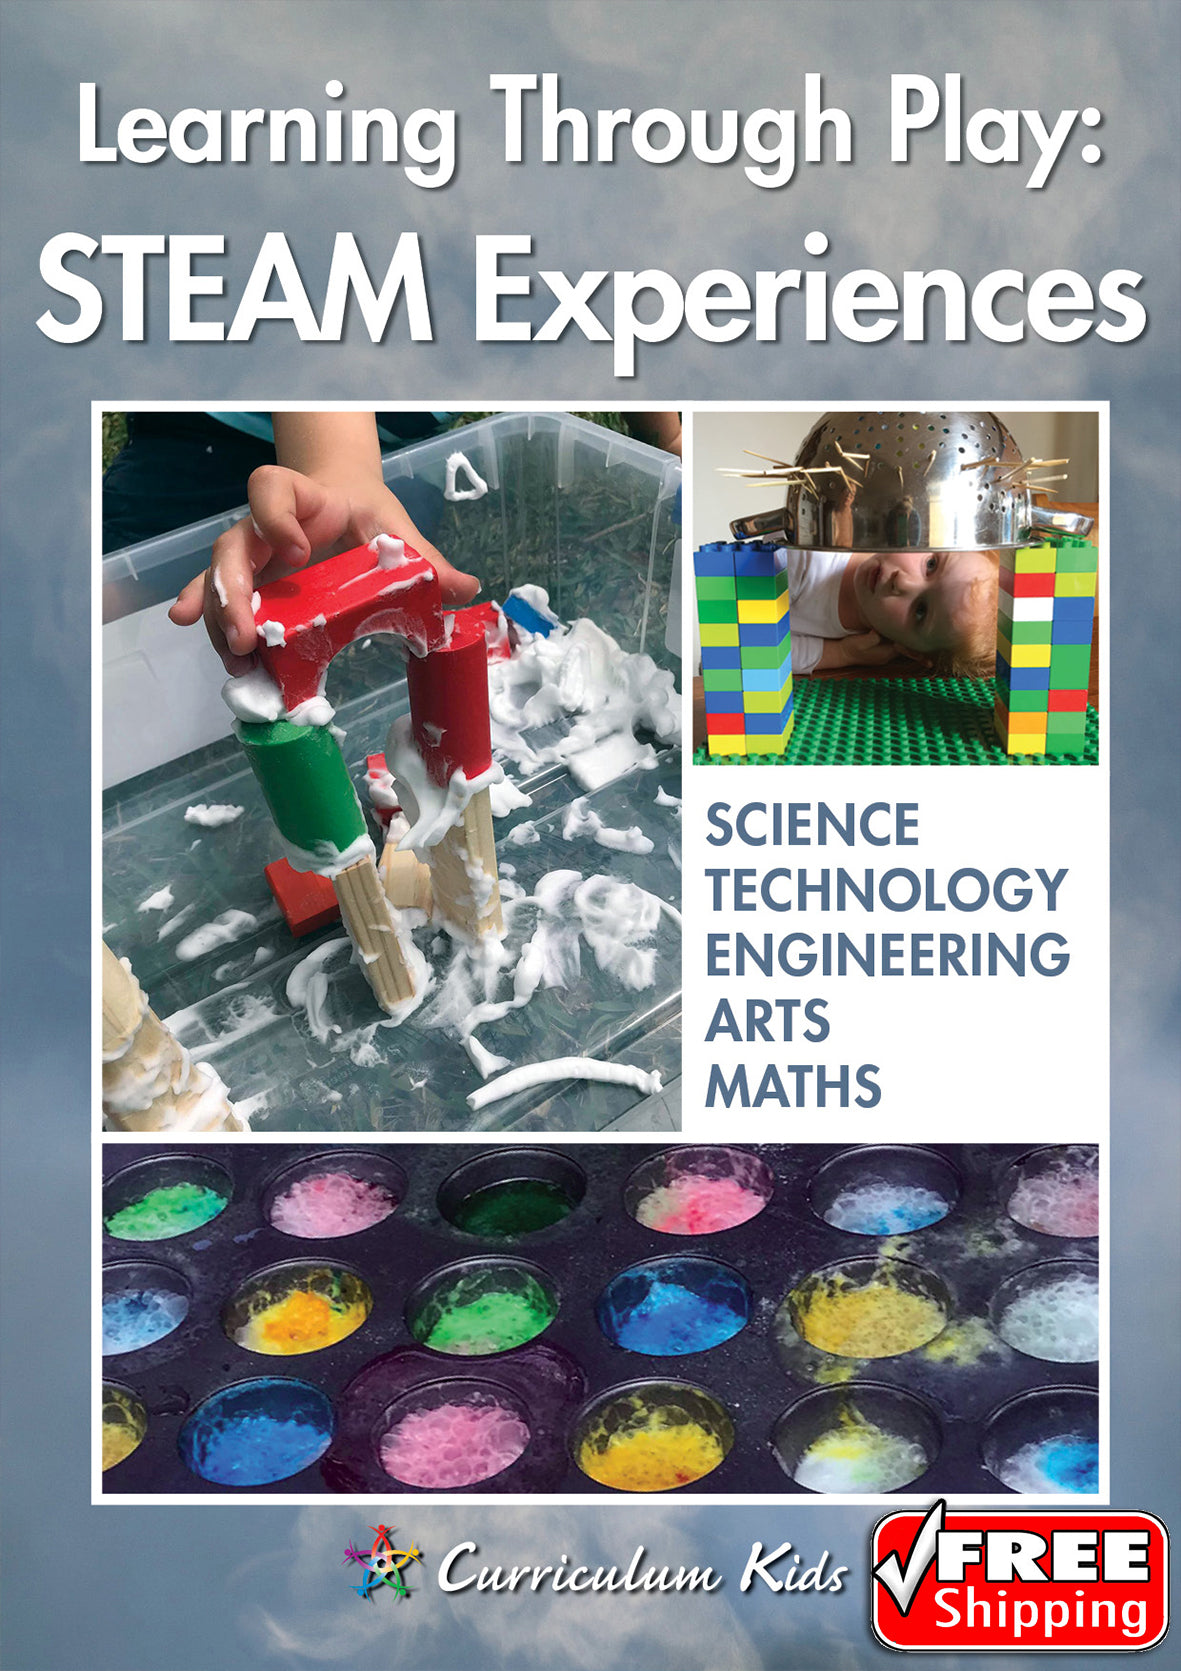 Learning Through Play: STEAM Experiences